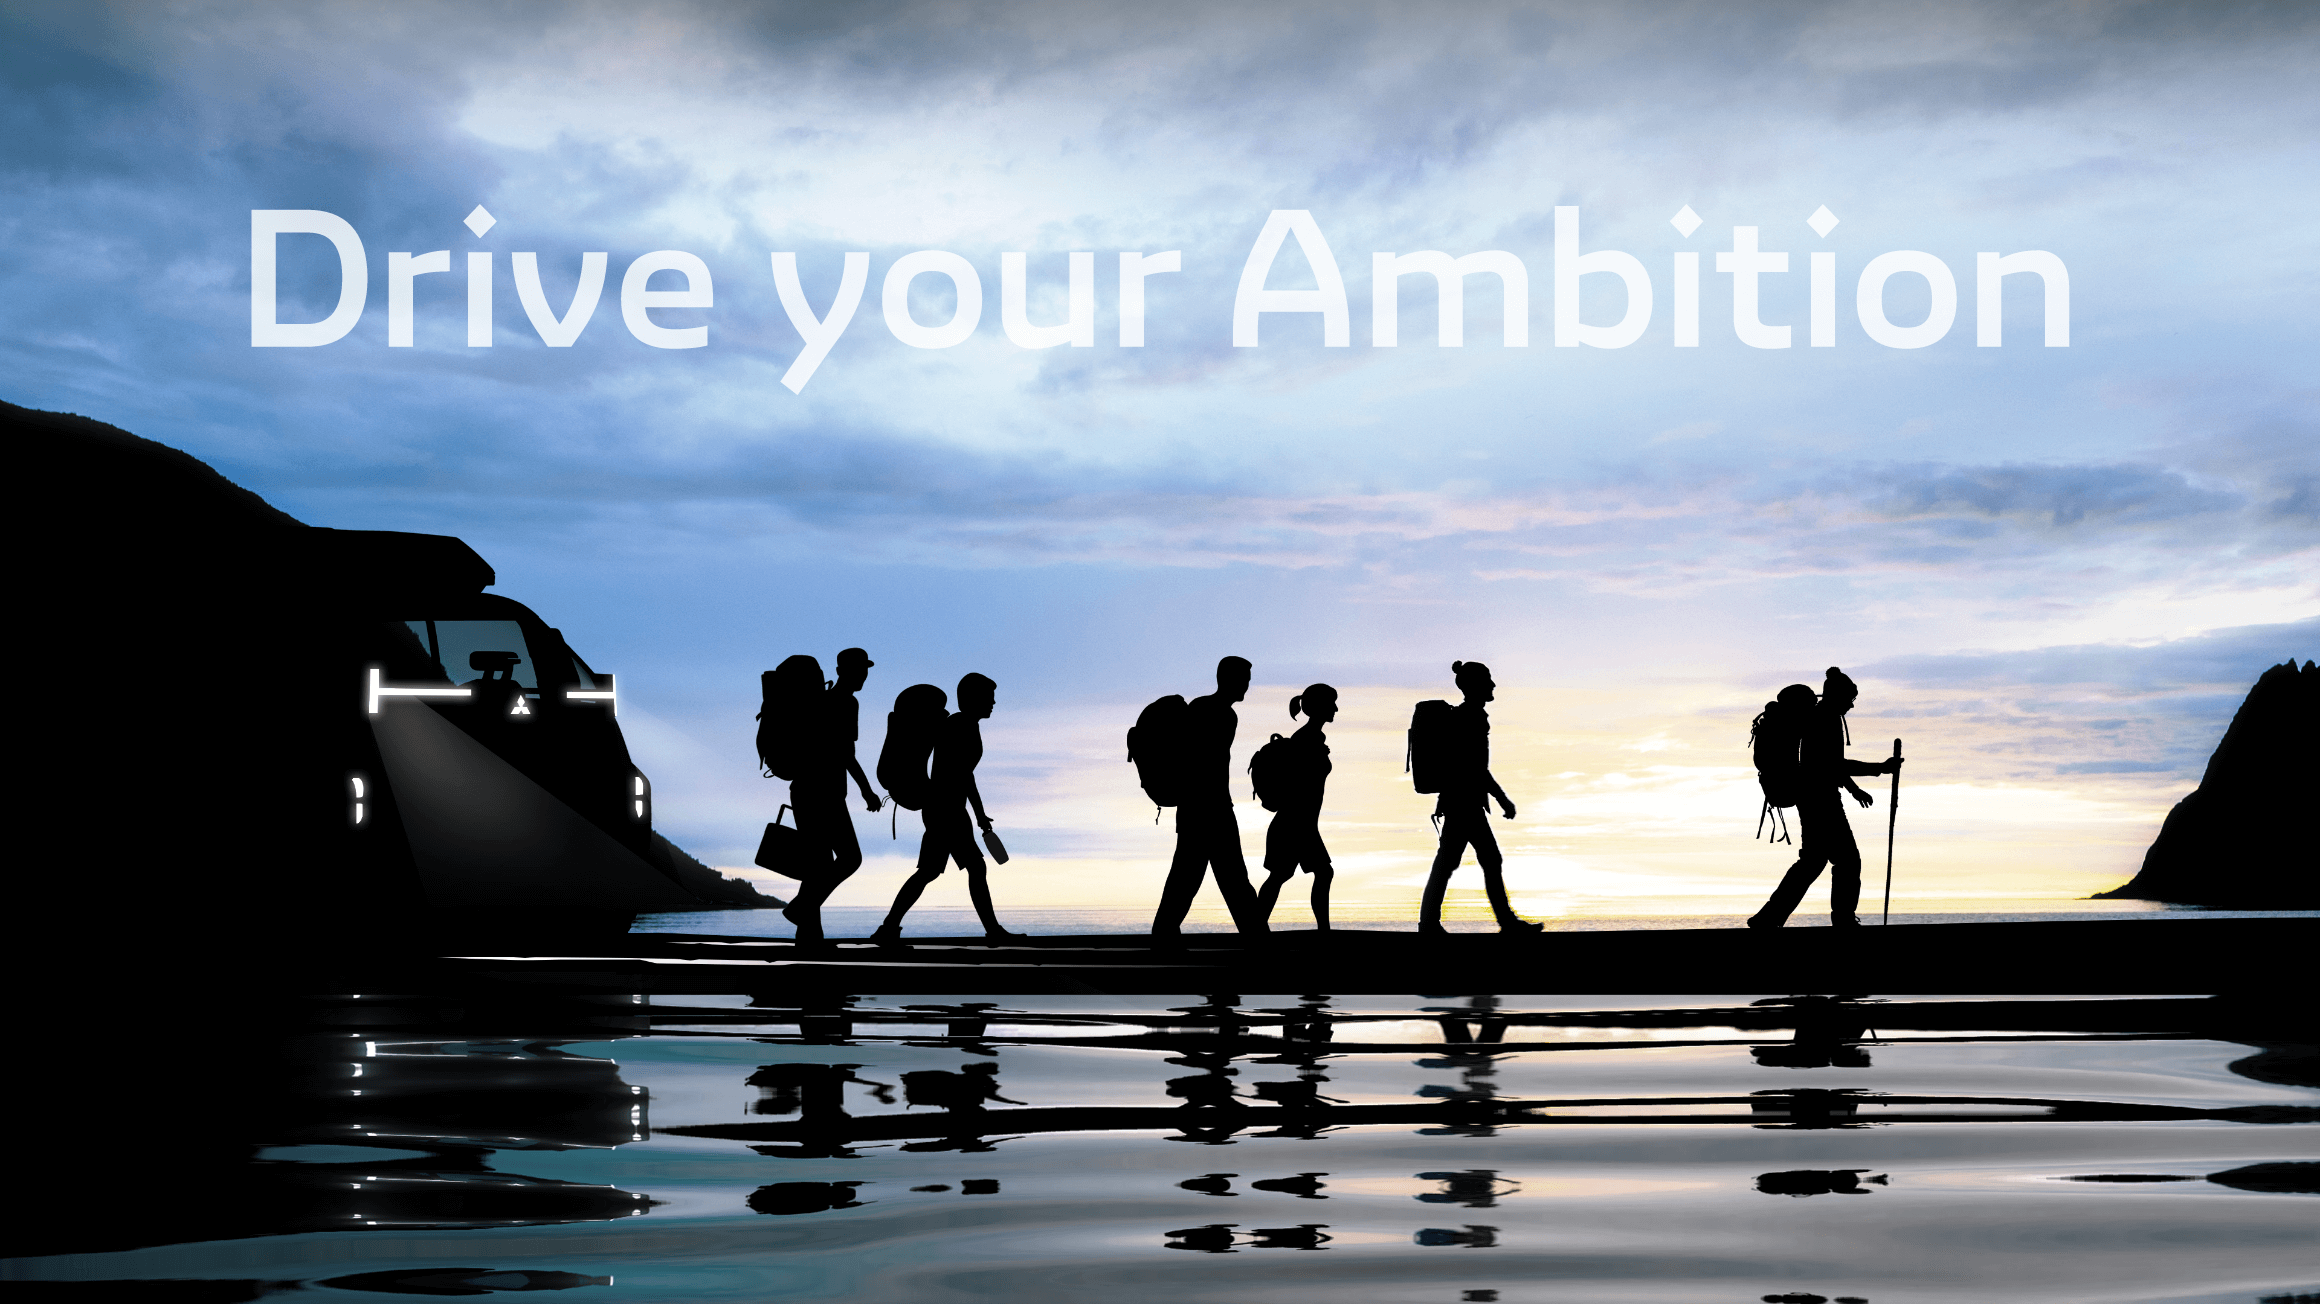 Drive your Ambition